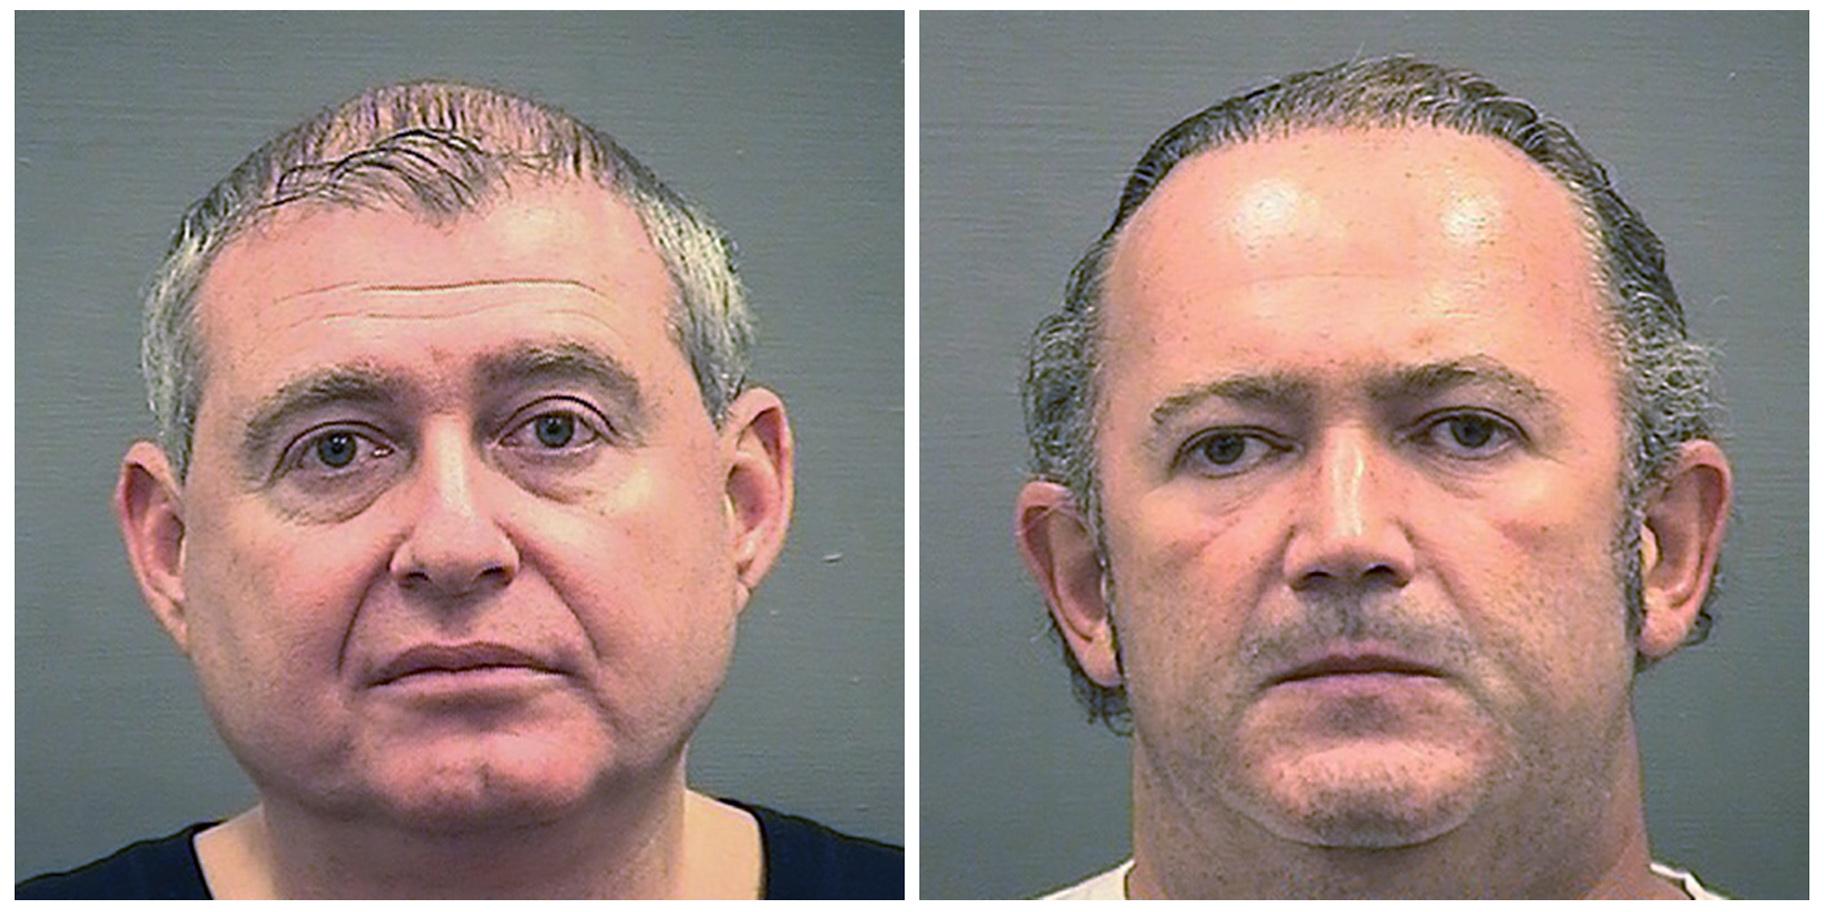 This combination of photos provided by the Alexandria Sheriff’s Office shows booking photos of Lev Parnas, left, and Igor Fruman. (Alexandria Sheriff's Office via AP)